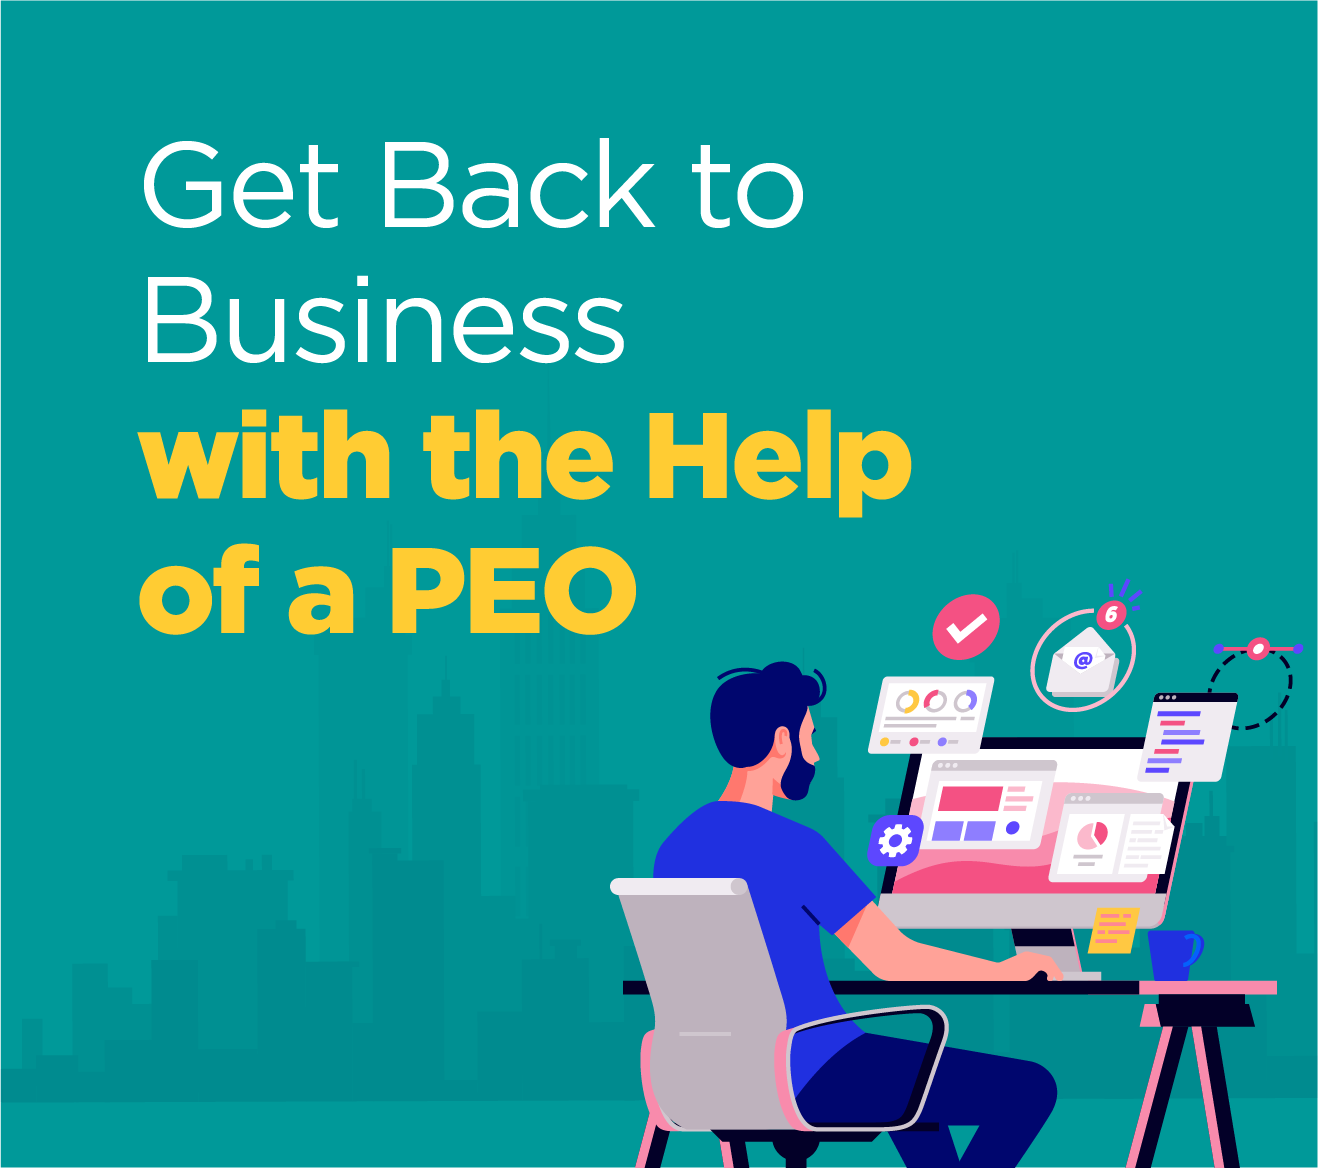 Get Back to Business with the Help of a PEO